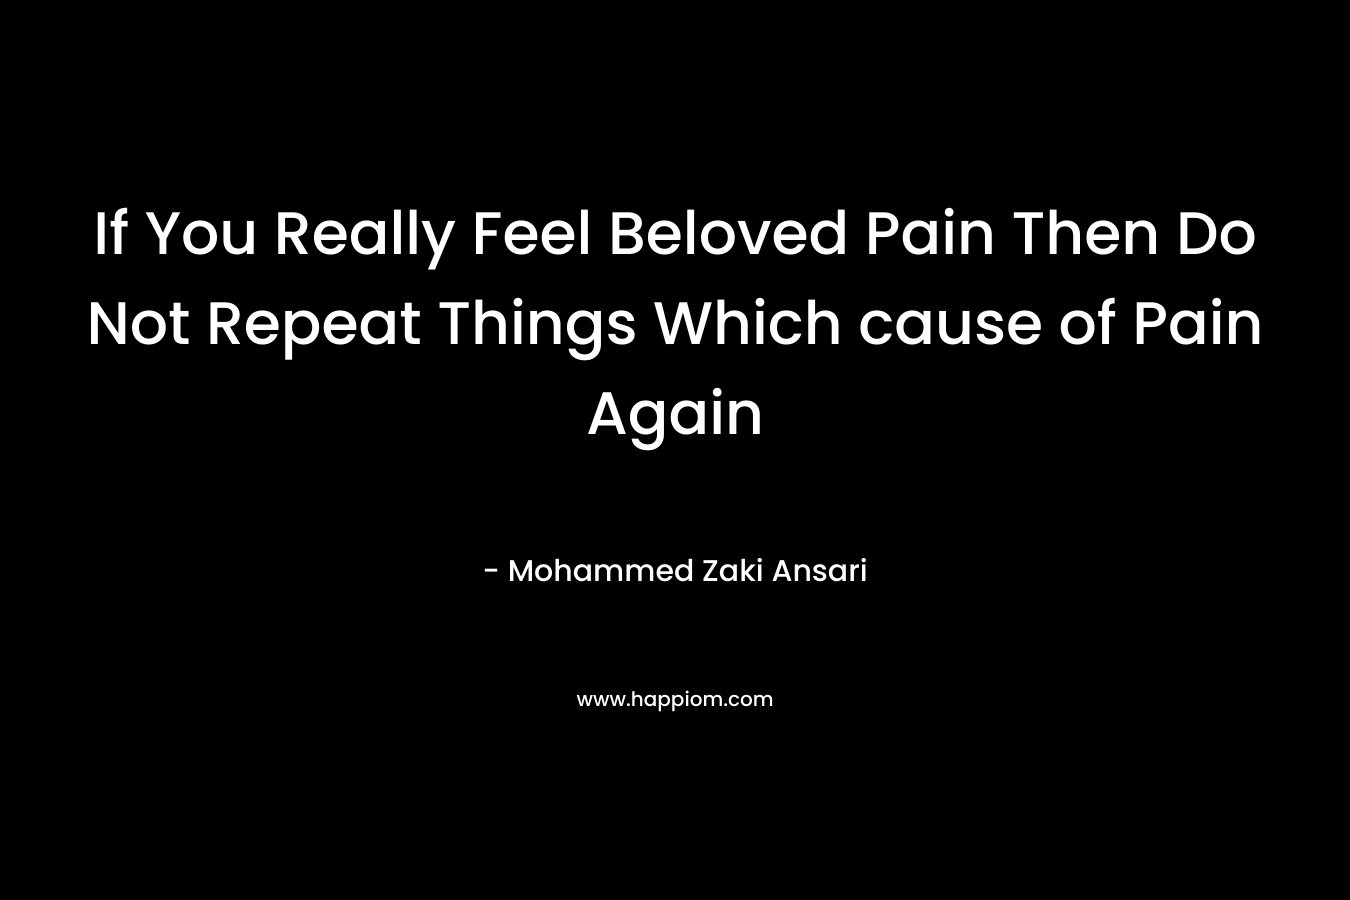 If You Really Feel Beloved Pain Then Do Not Repeat Things Which cause of Pain Again